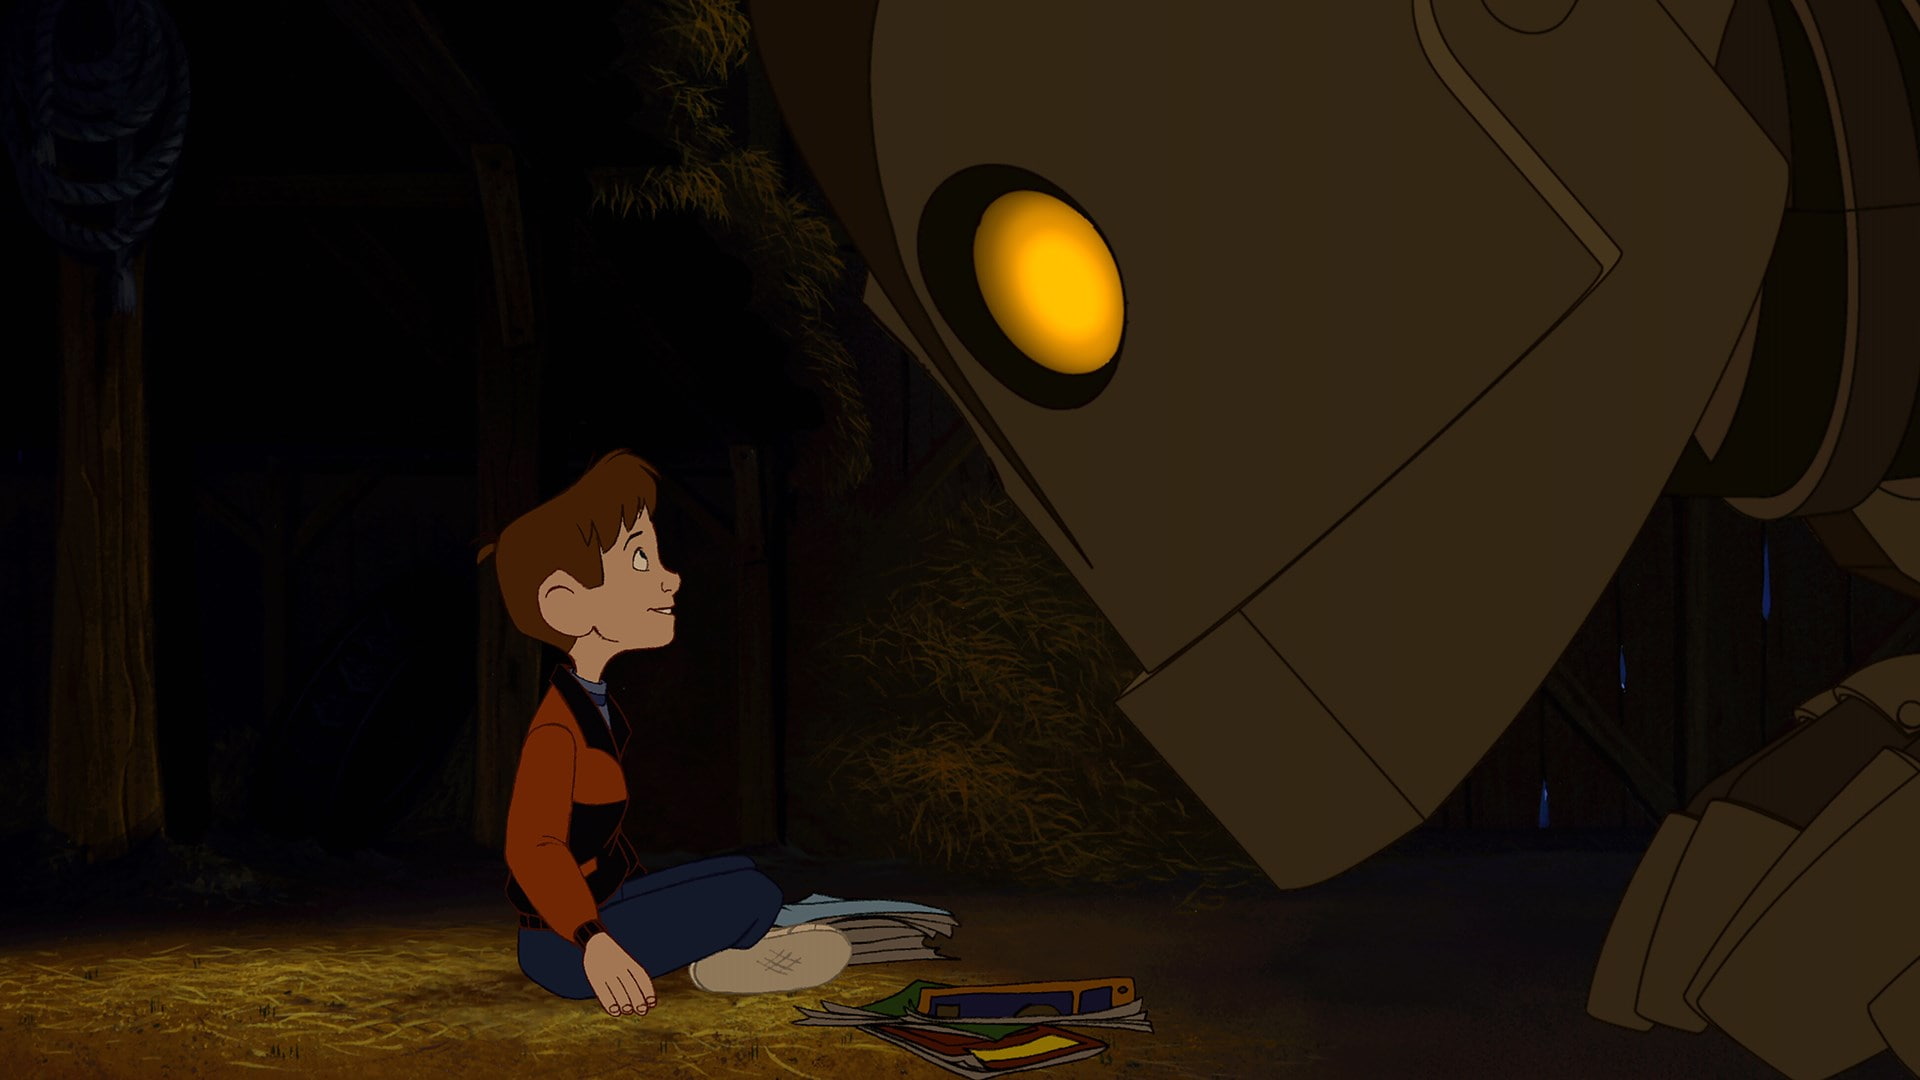 the iron giant, one person, indoors, standing, representation